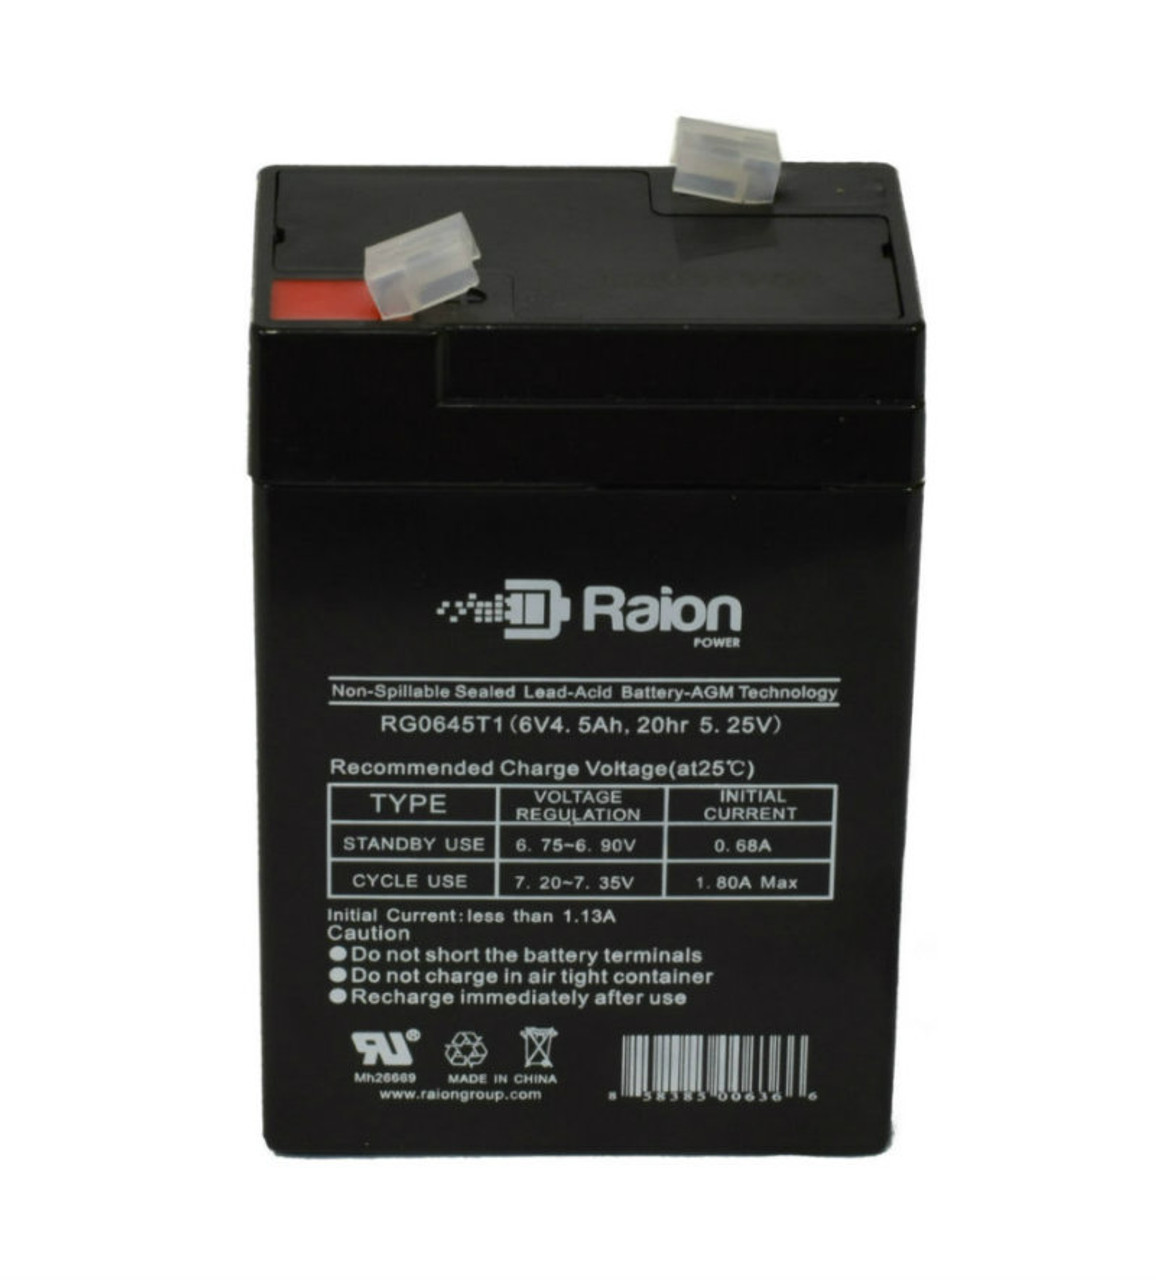 Raion Power RG0645T1 Replacement Battery Cartridge for Baxter Healthcare 522 Microate Inf Pump